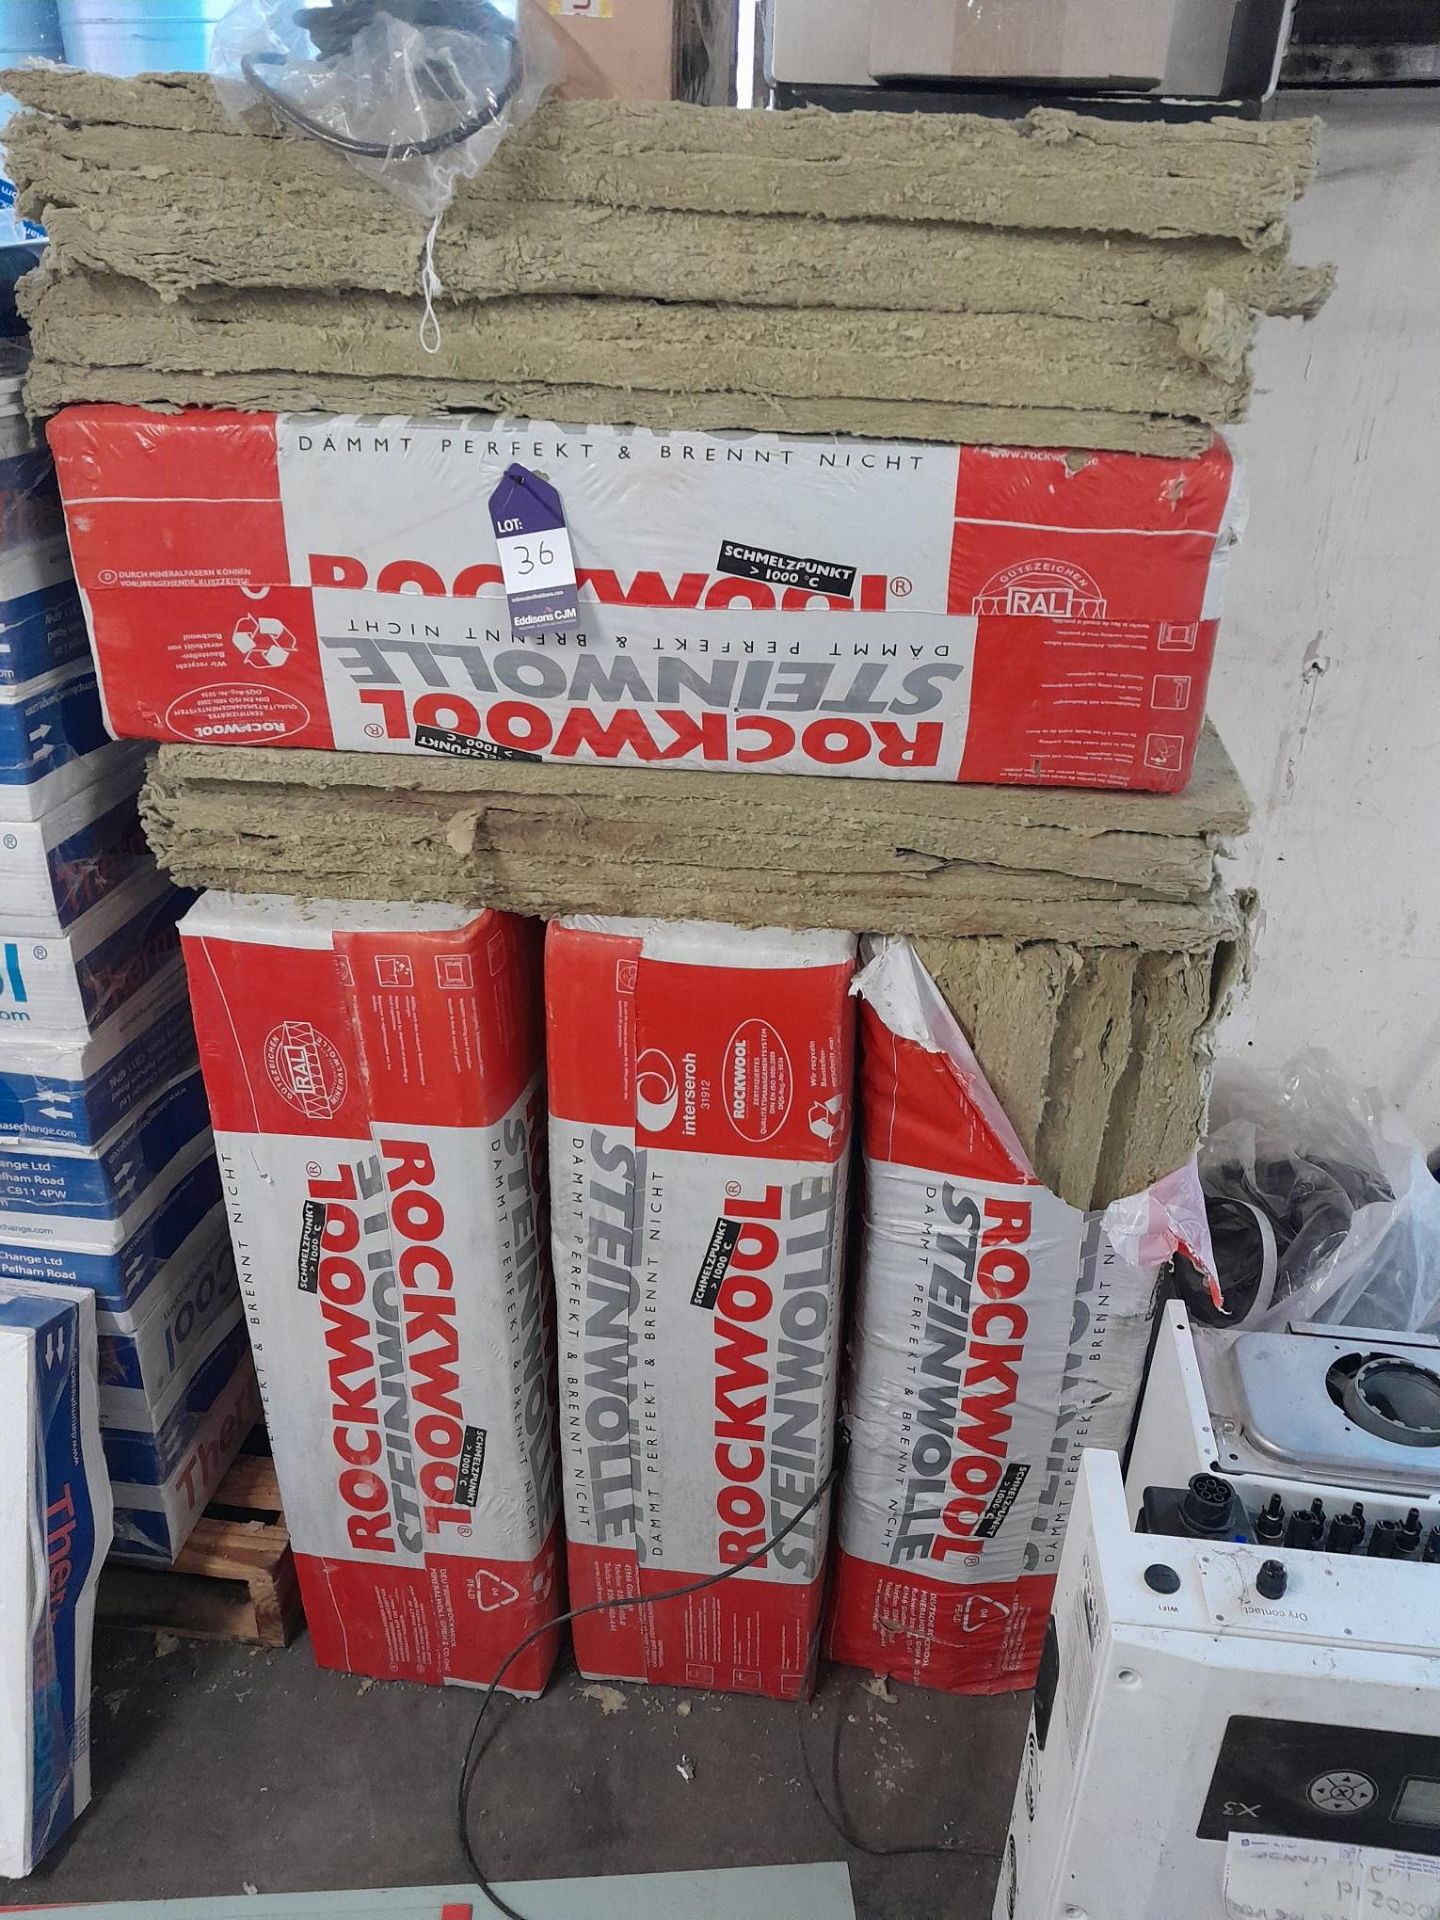 Lot Comprising of 4 Complete Packs and Single Items of Rockwool Insulation (possibly used) As lotted